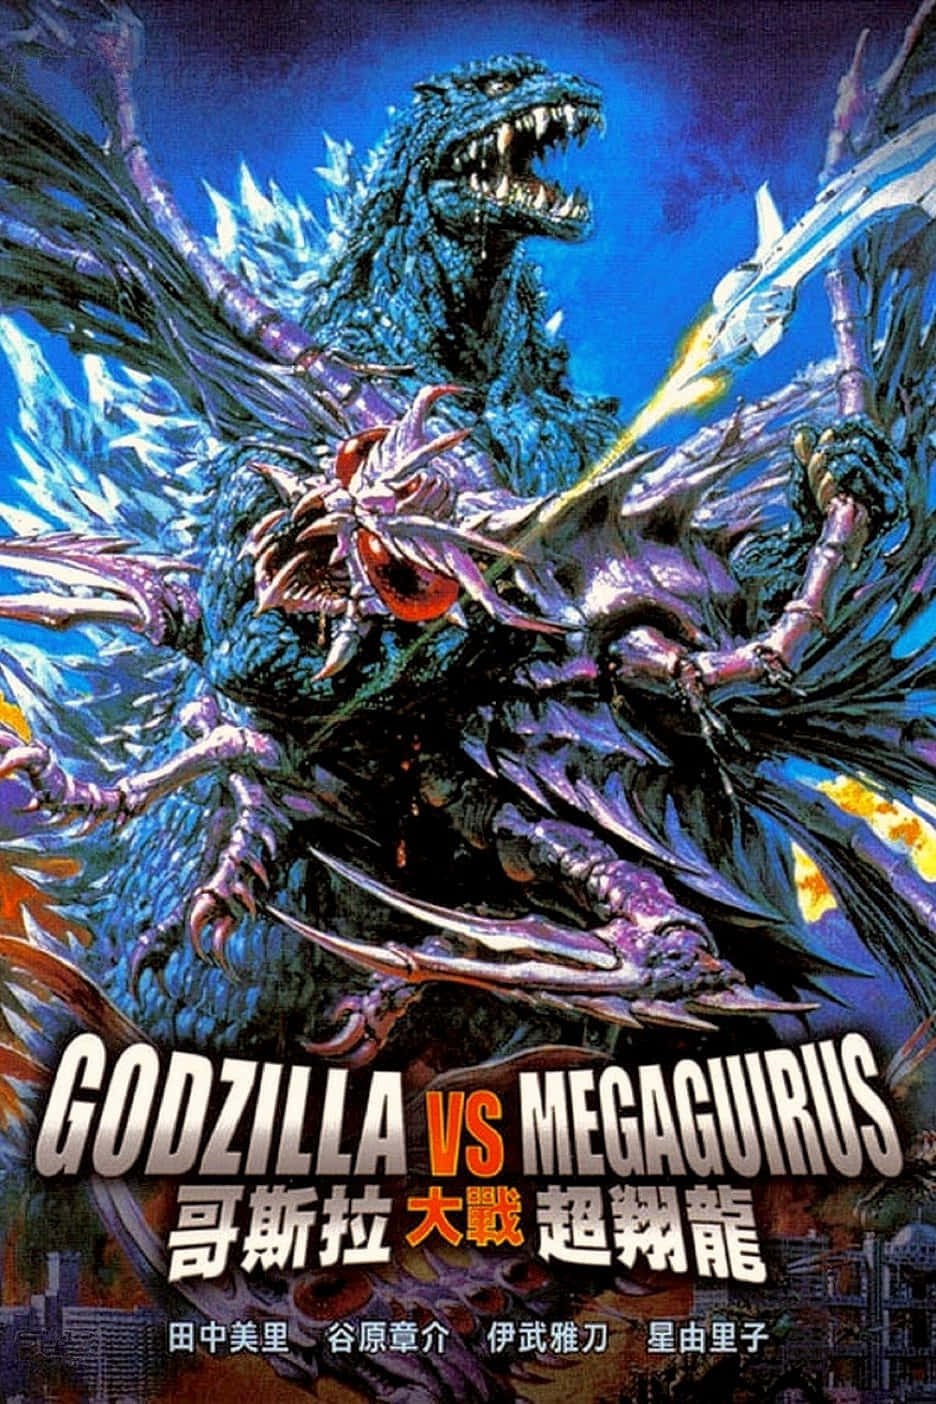 Godzilla faces off against Megaguirus in an epic battle Wallpaper